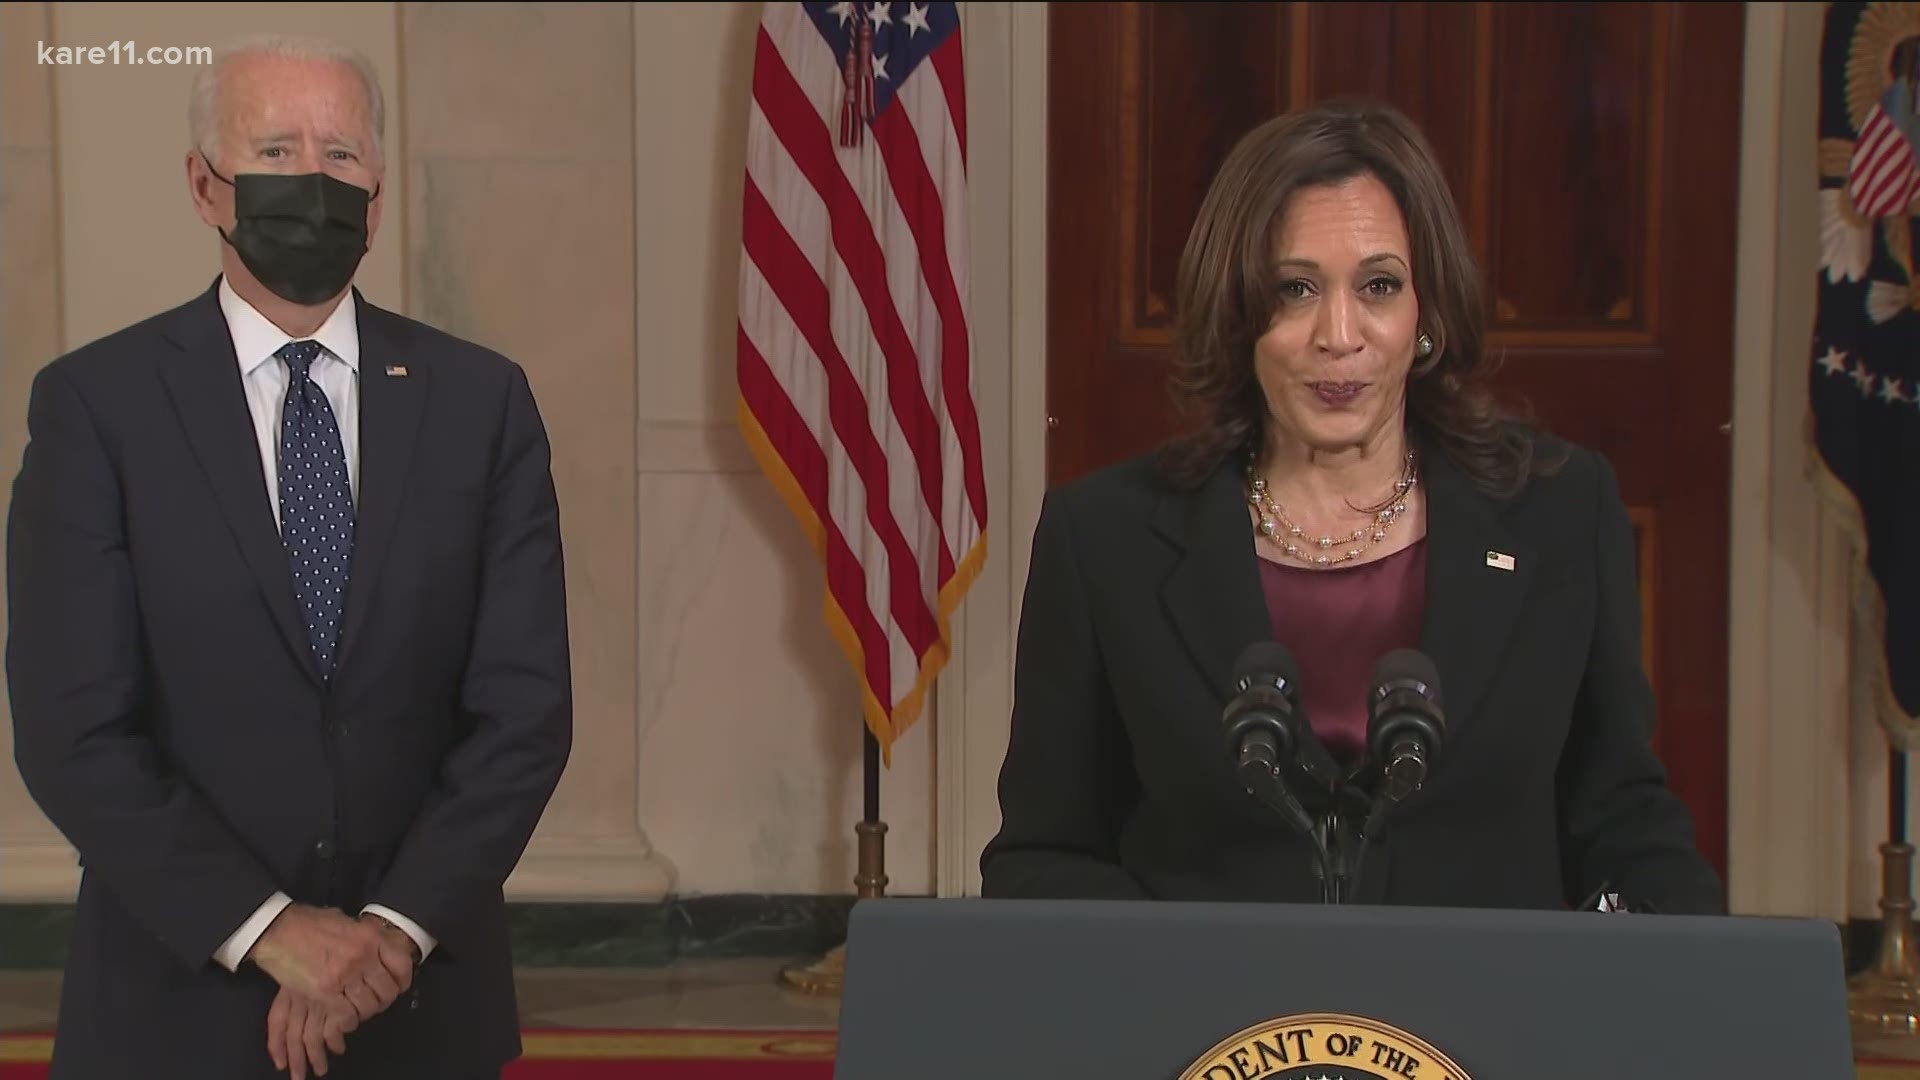 Vice President Kamala Harris reacts after former police officer Derek Chauvin was found guilty of murdering George Floyd.